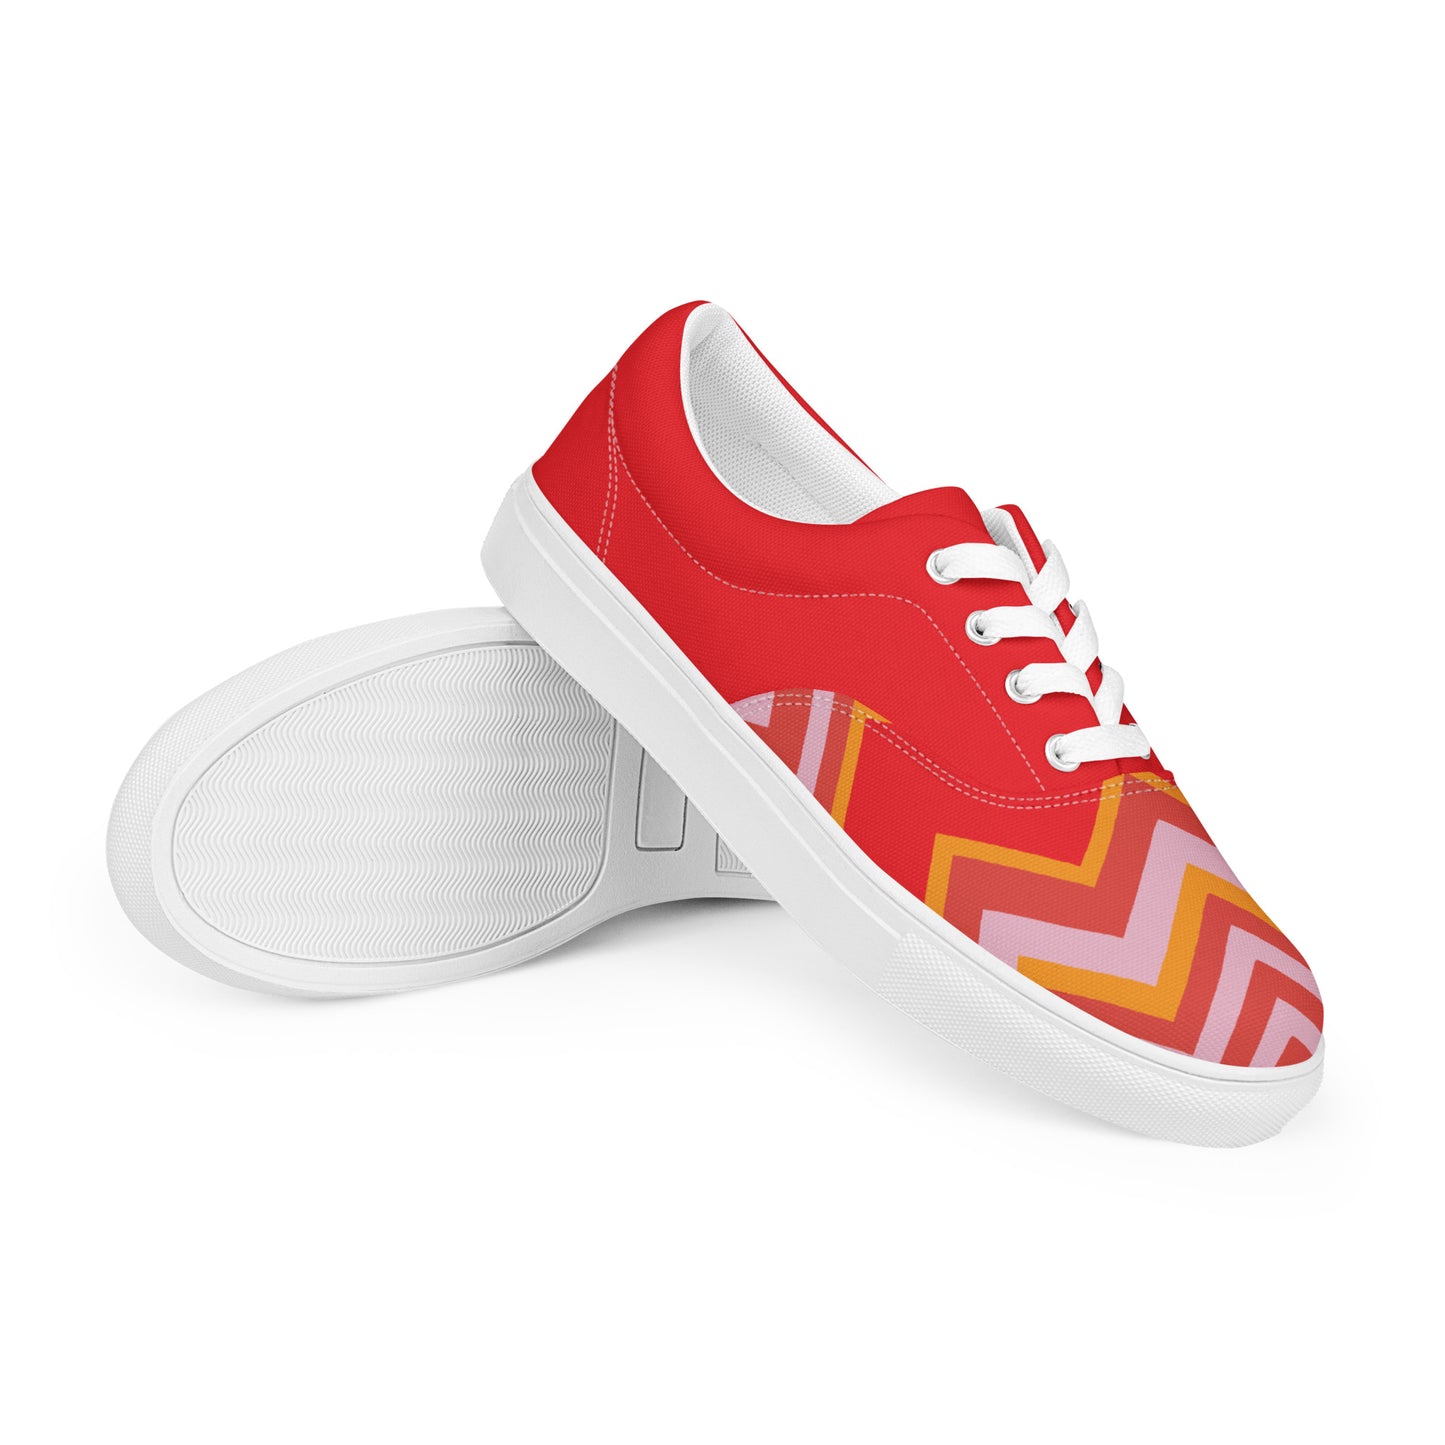 Retro Zigzag - Inspired By Taylor Swift - Sustainably Made Men’s lace-up canvas shoes